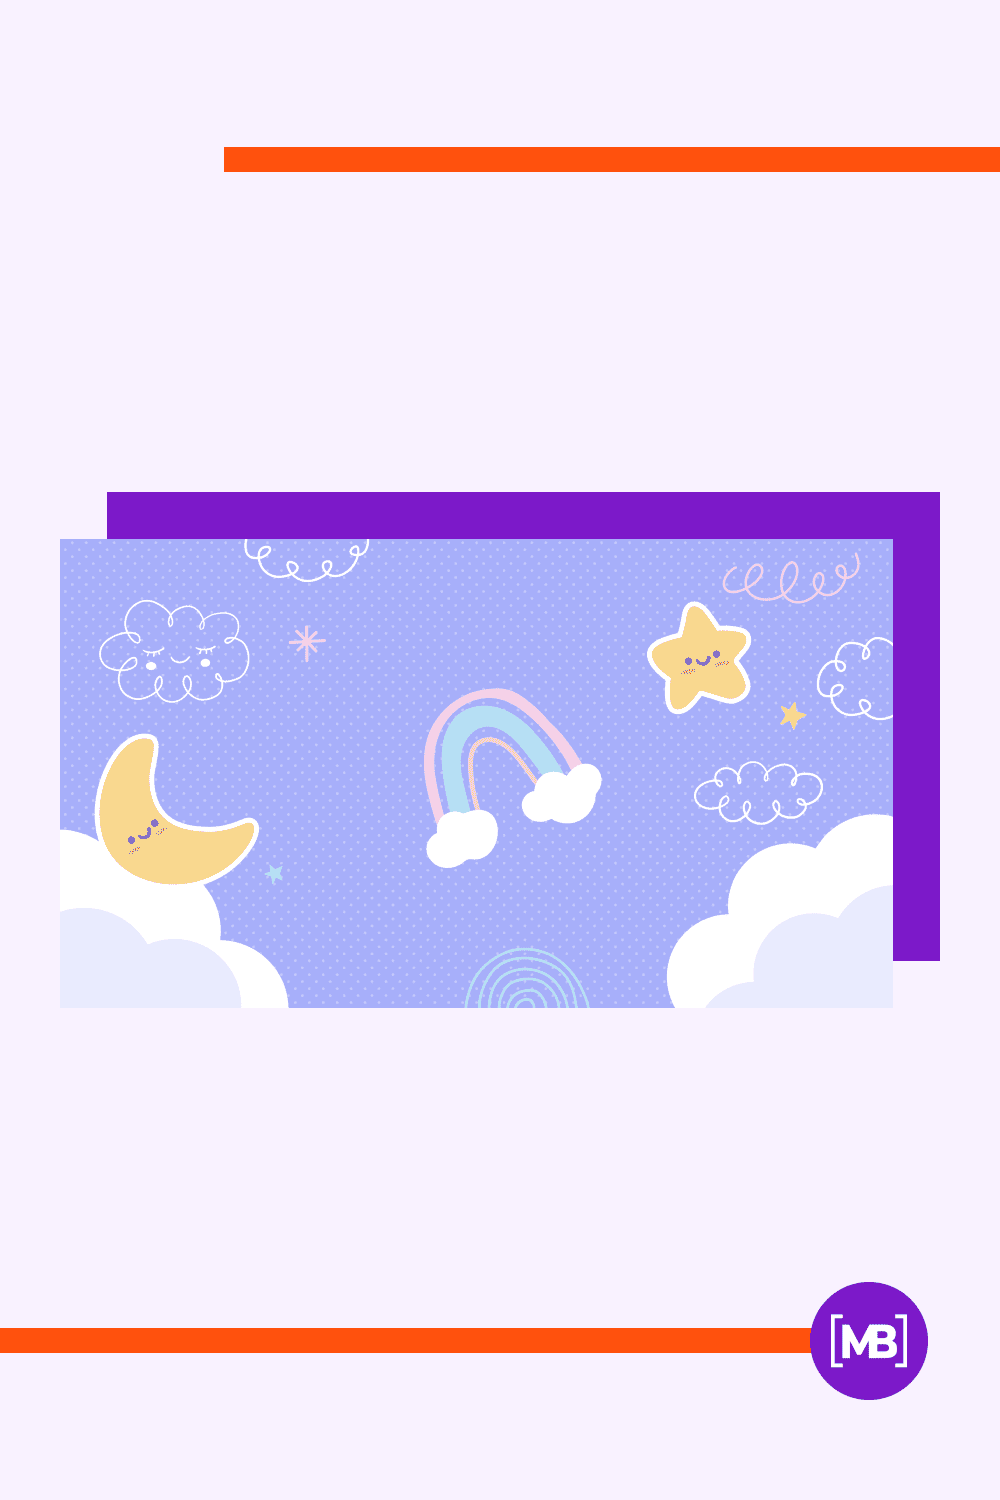 Cute image with drawn moon, star, rainbow, cloud on purple background.